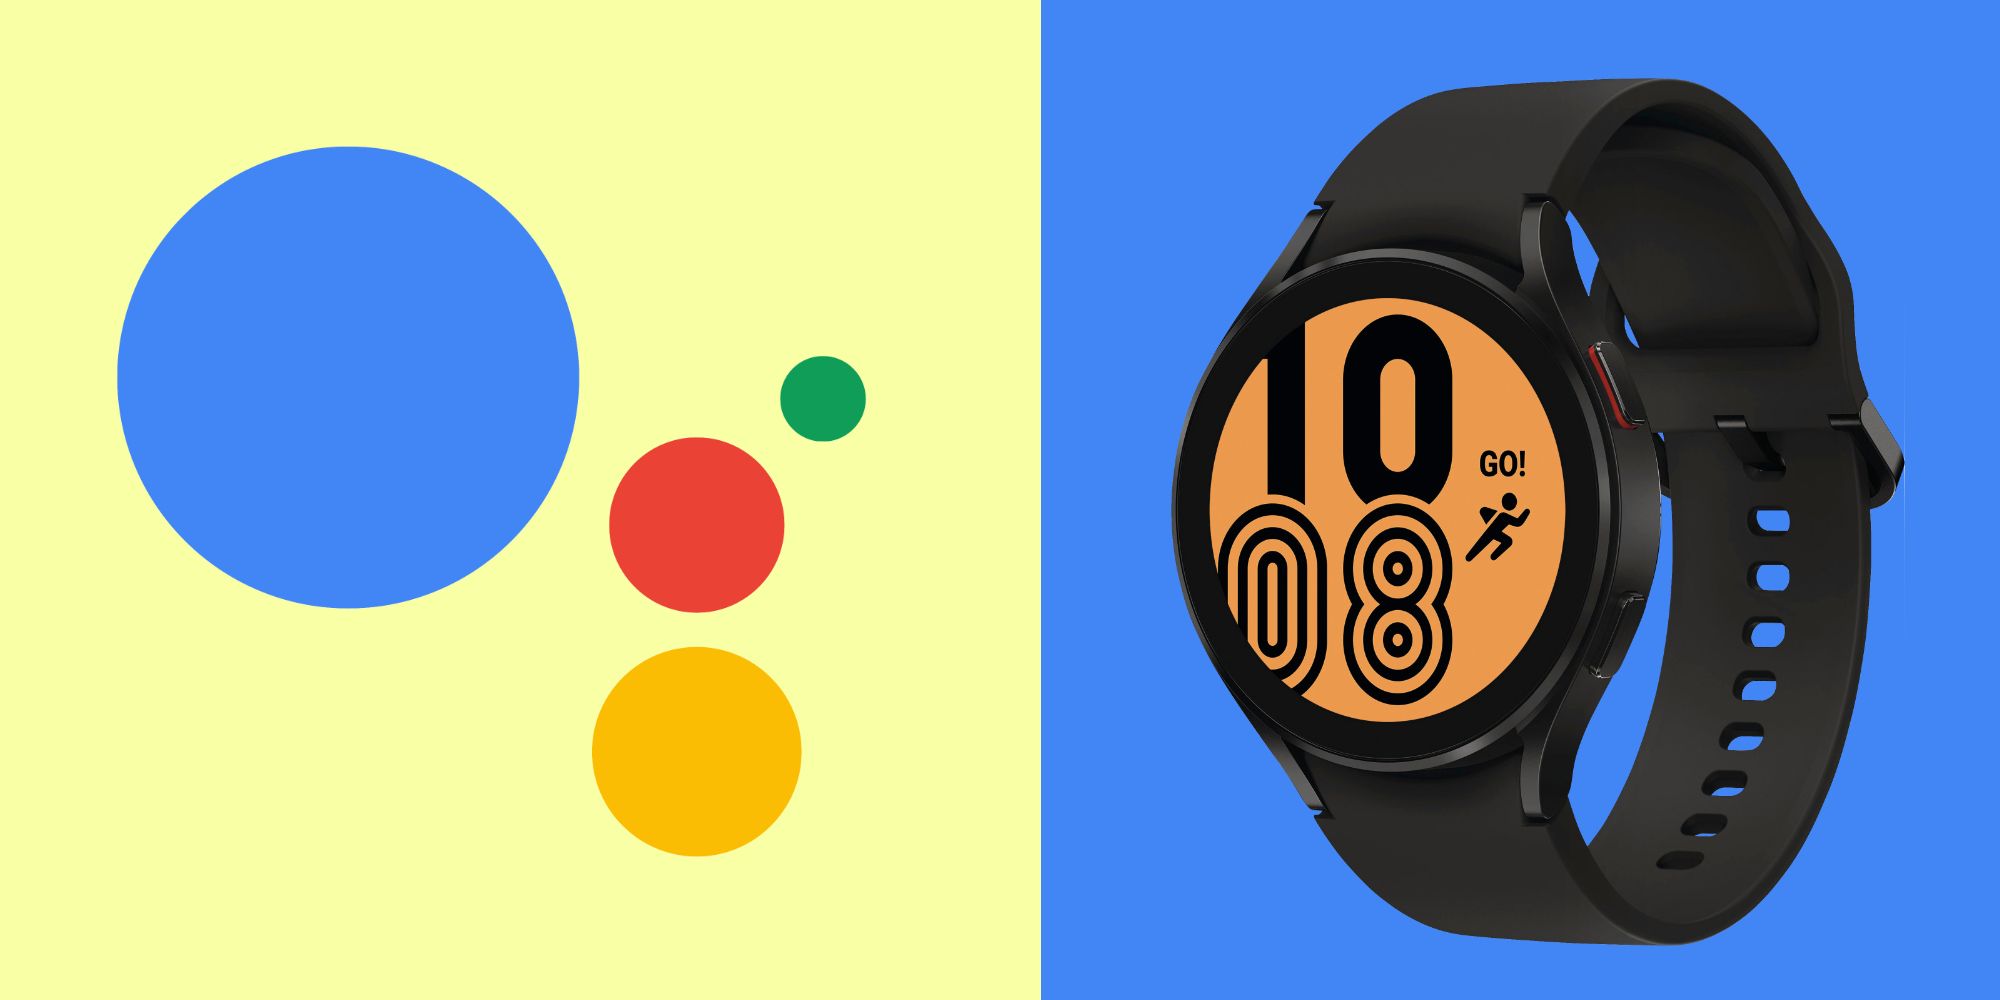 A Galaxy Watch 4 next to the Google Assistant logo